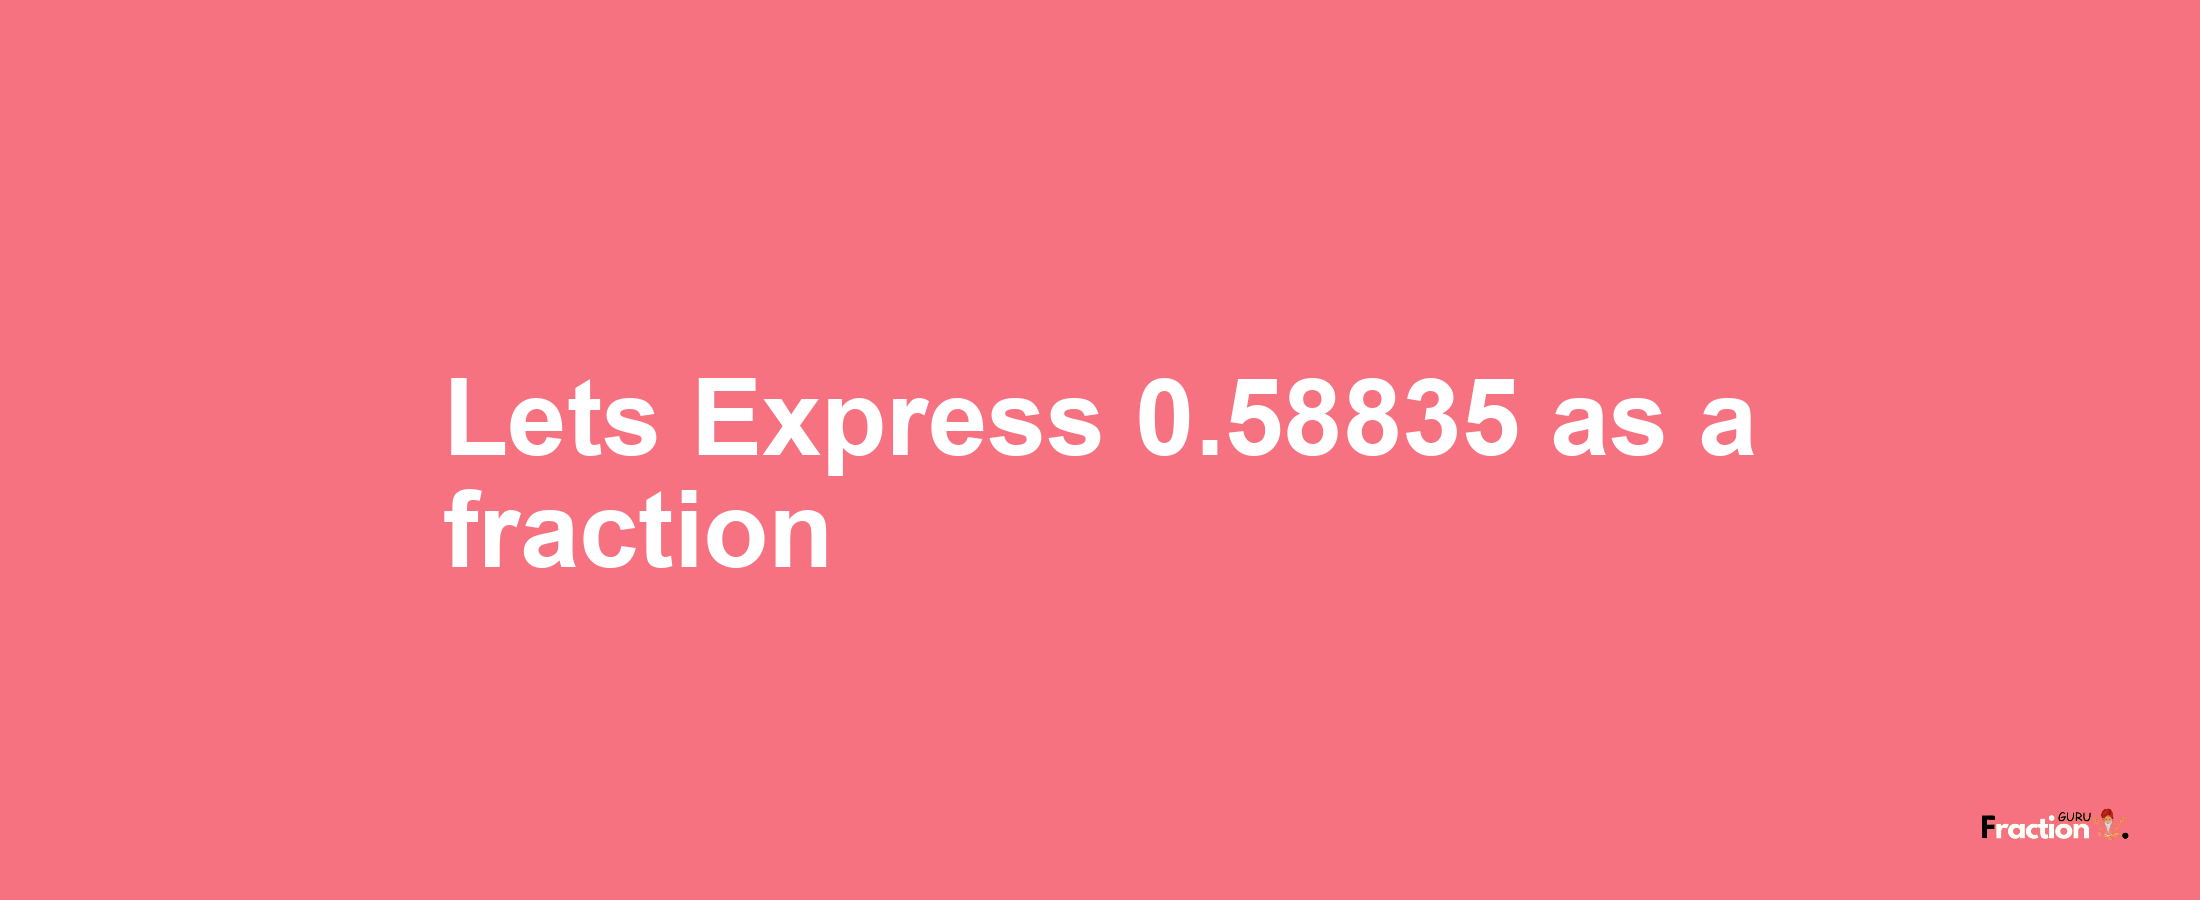 Lets Express 0.58835 as afraction